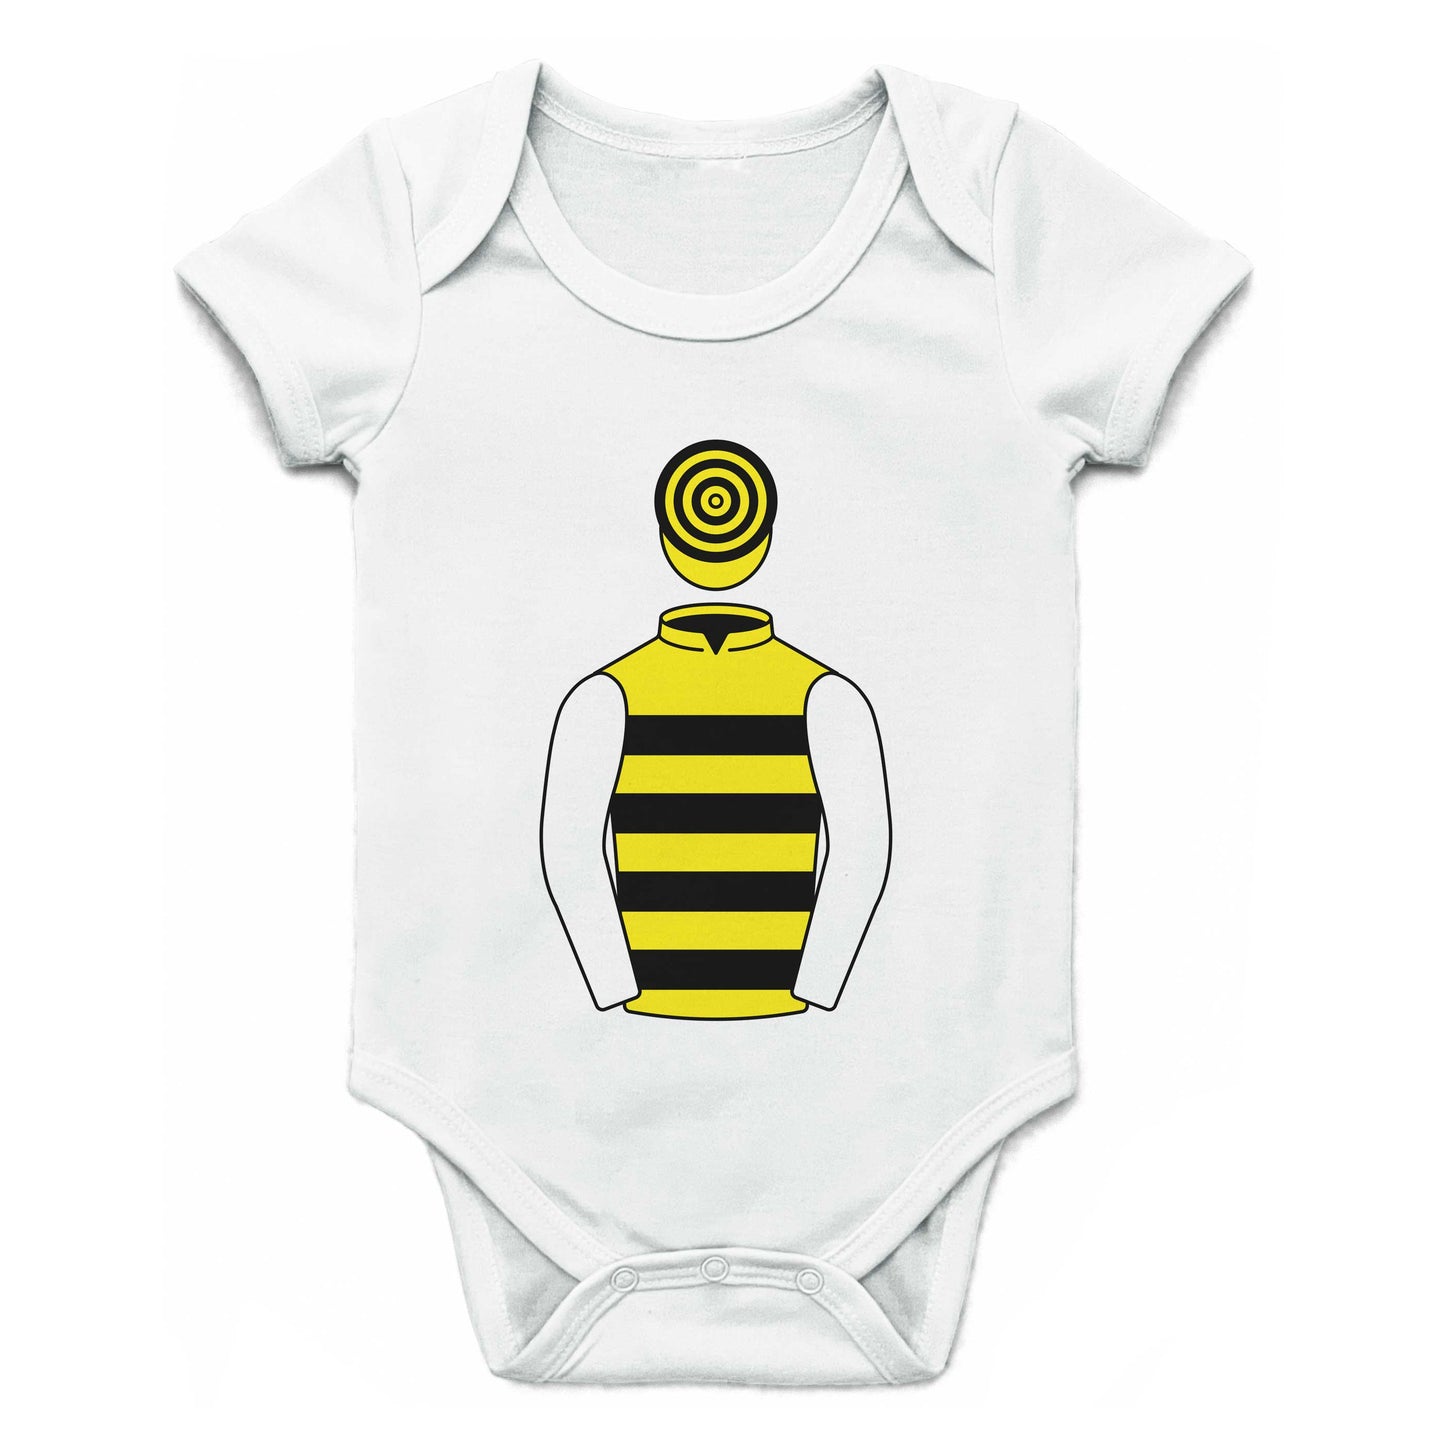 Lewis, Lawson And Hope Single Silks Baby Grow - Baby Grow - Hacked Up